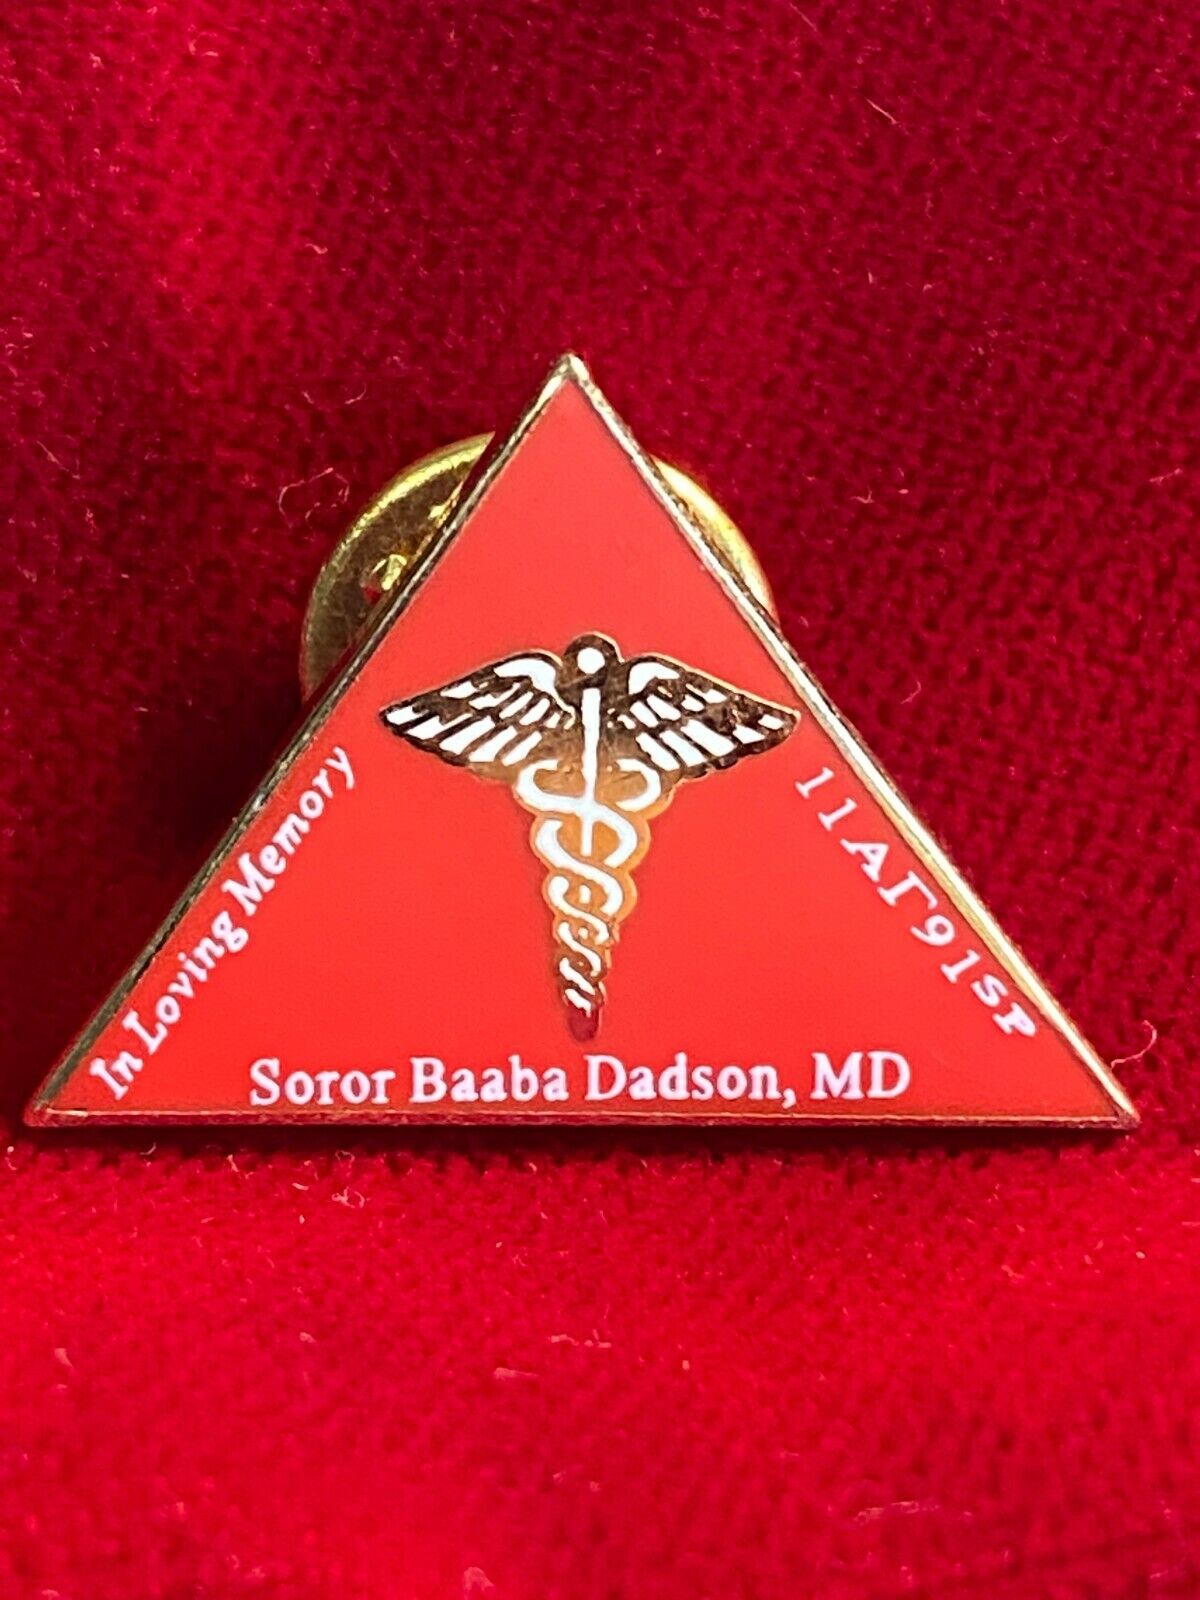 In Memory Soror Baaba Dadson MD Hermes Staff Medical Cloisonné Tie Lapel Pin 1